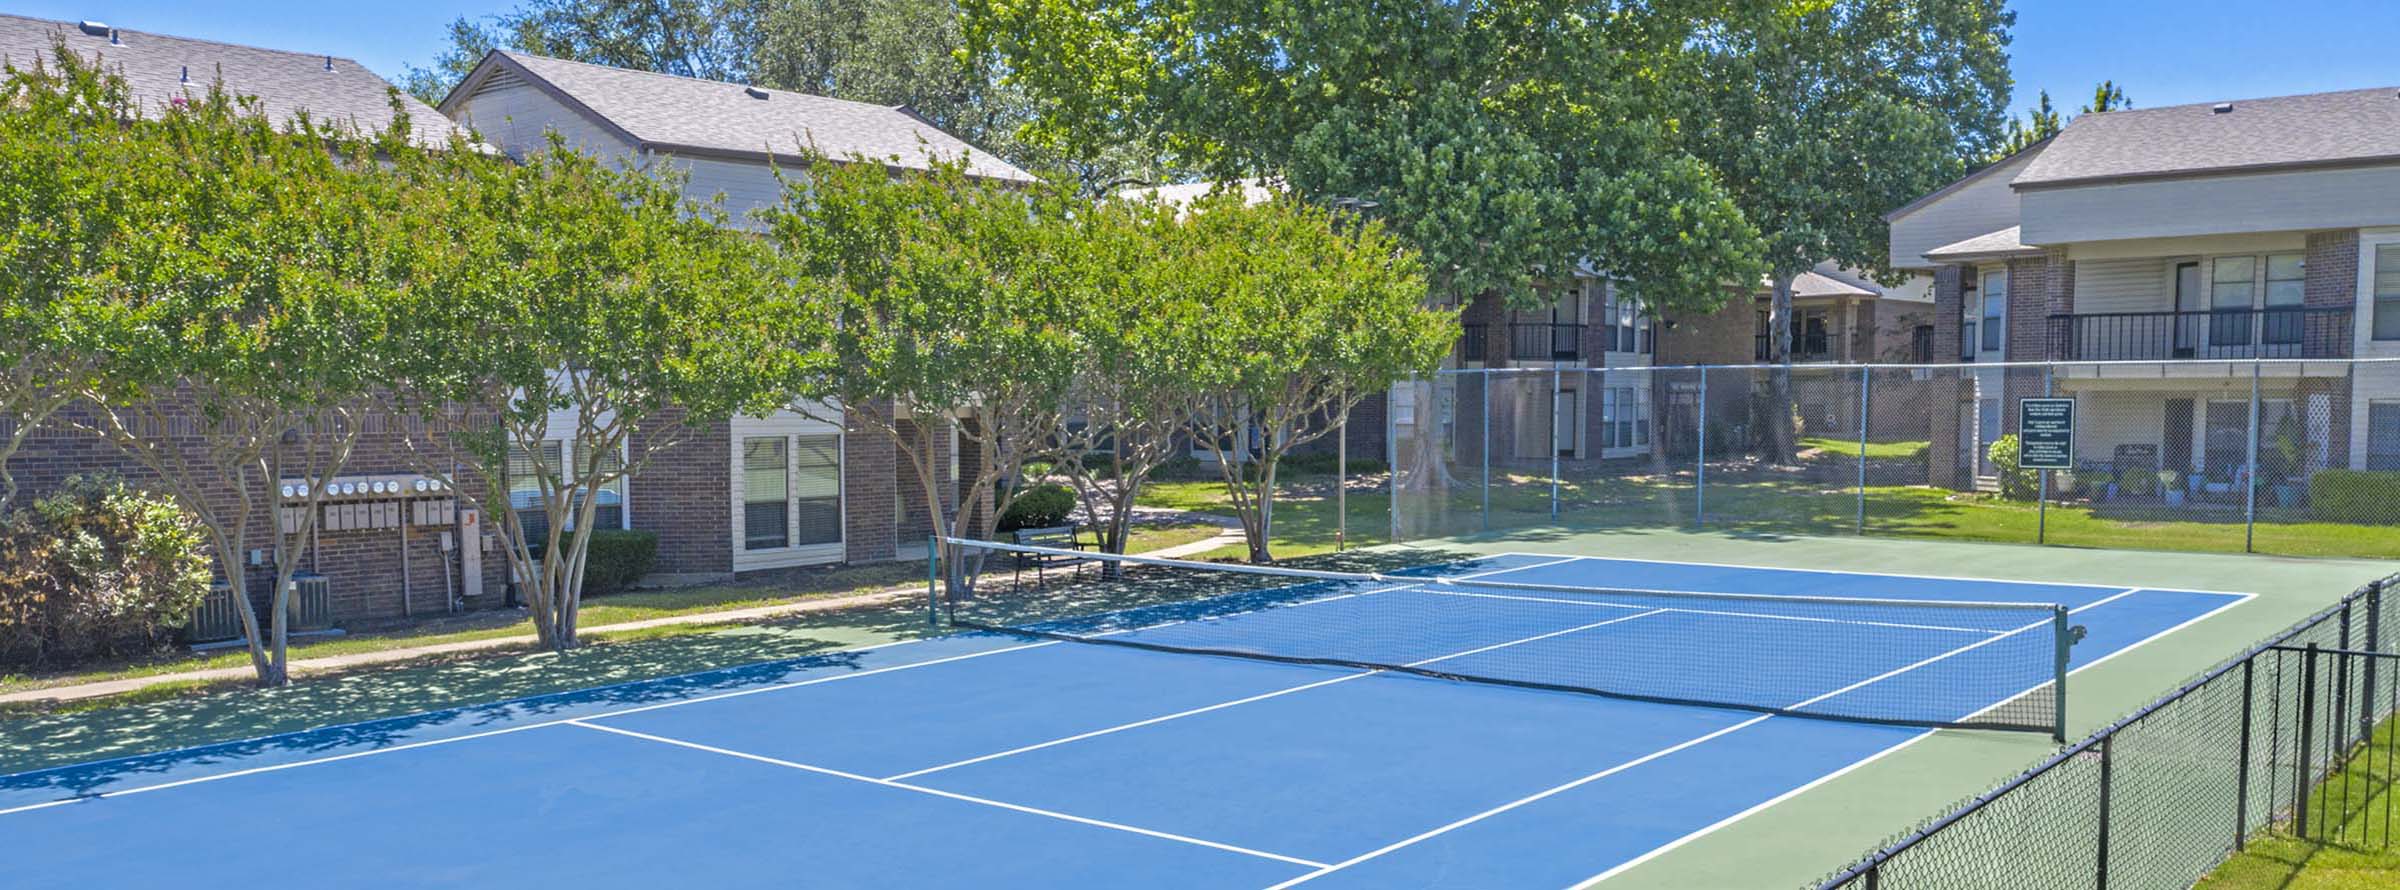 Apartments with tennis courts